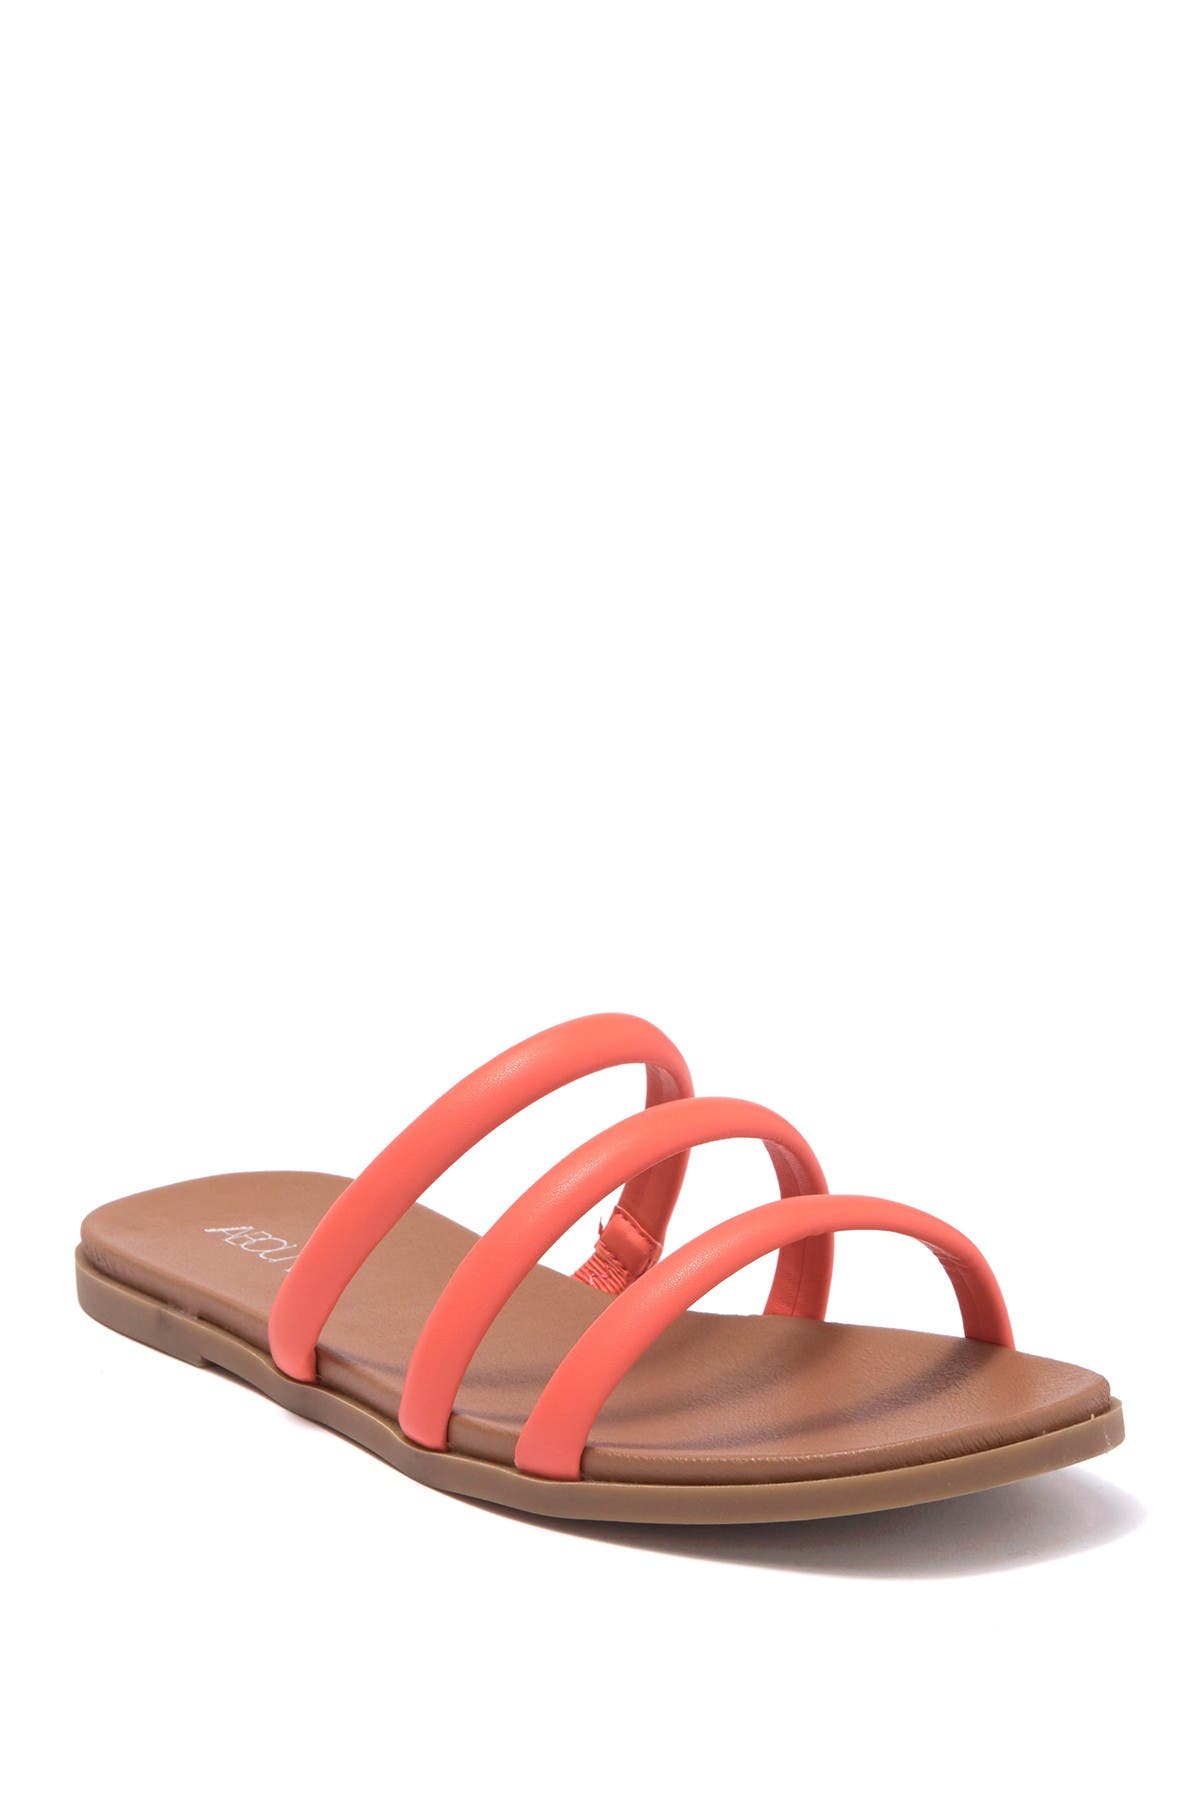 Abound Sammira Strappy Flat Sandal In Coral Camelia